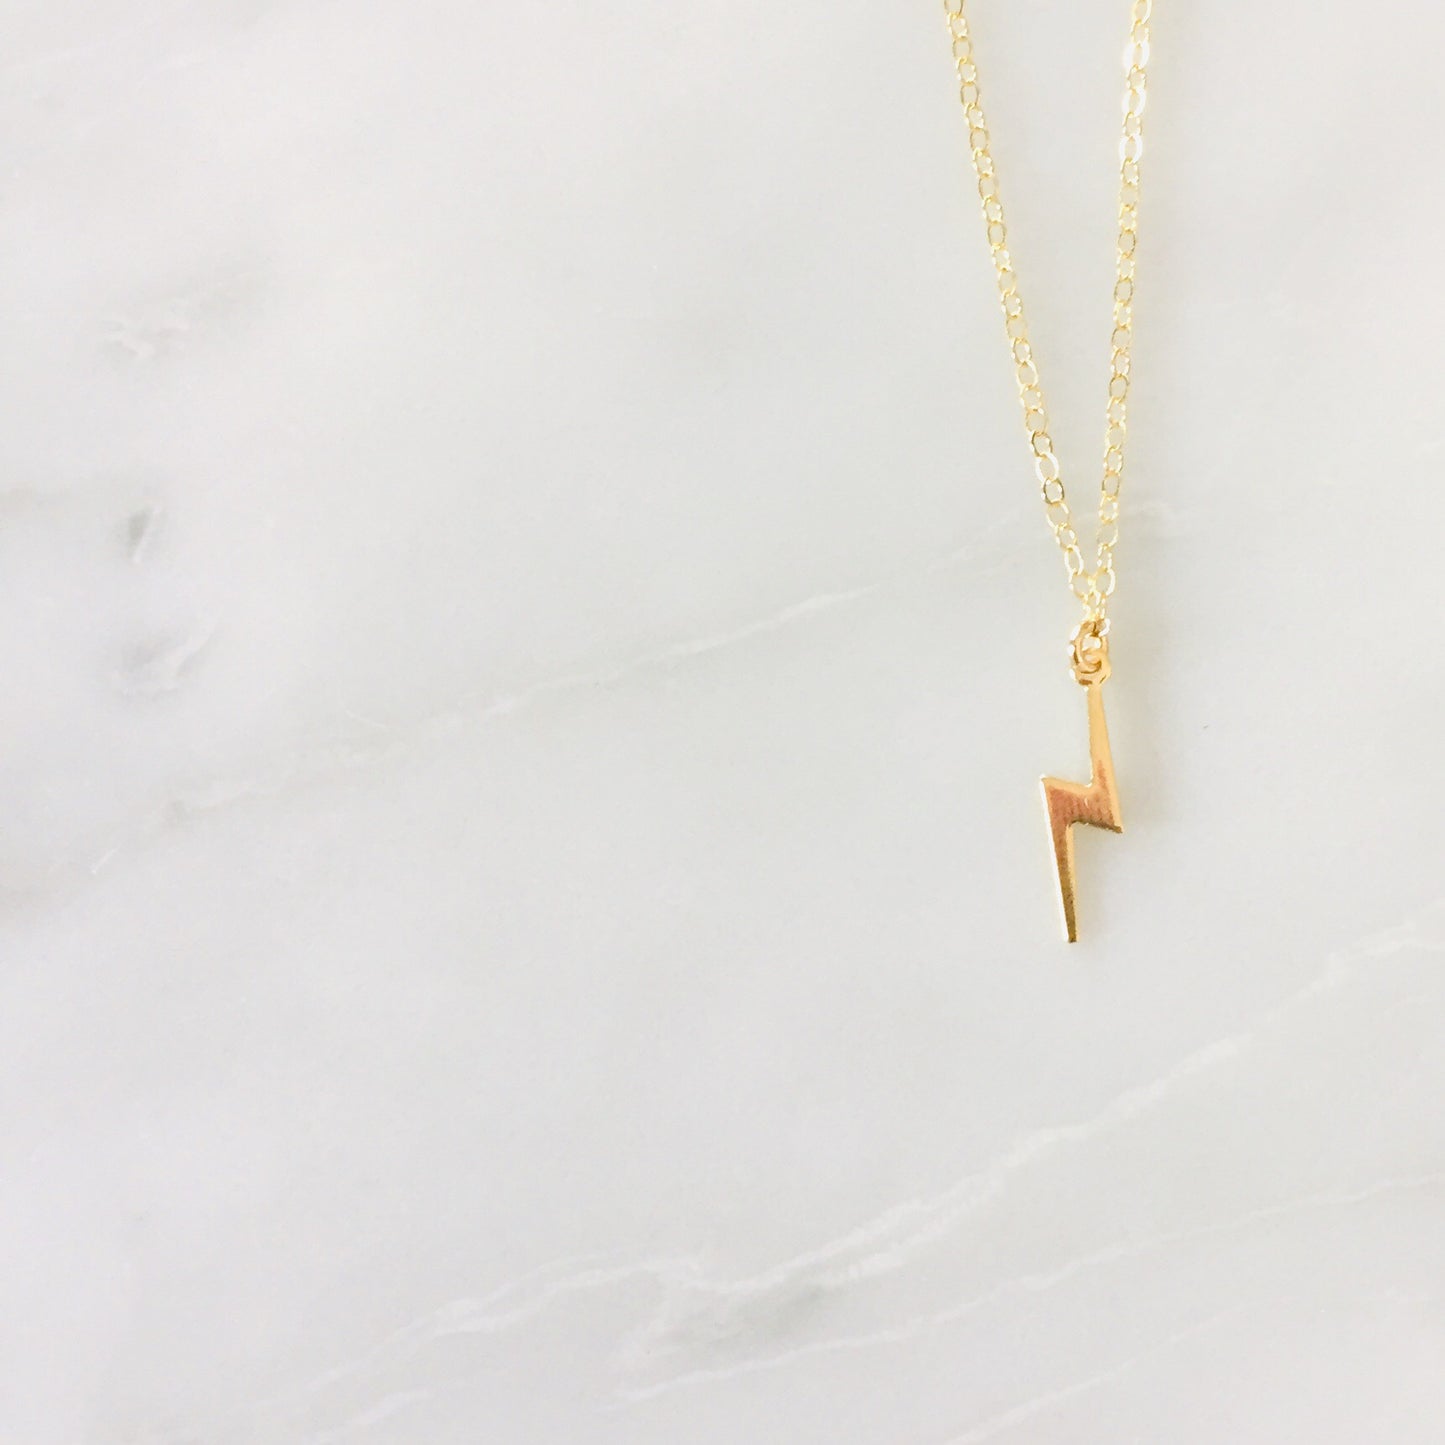 The Bolt Charm Necklace